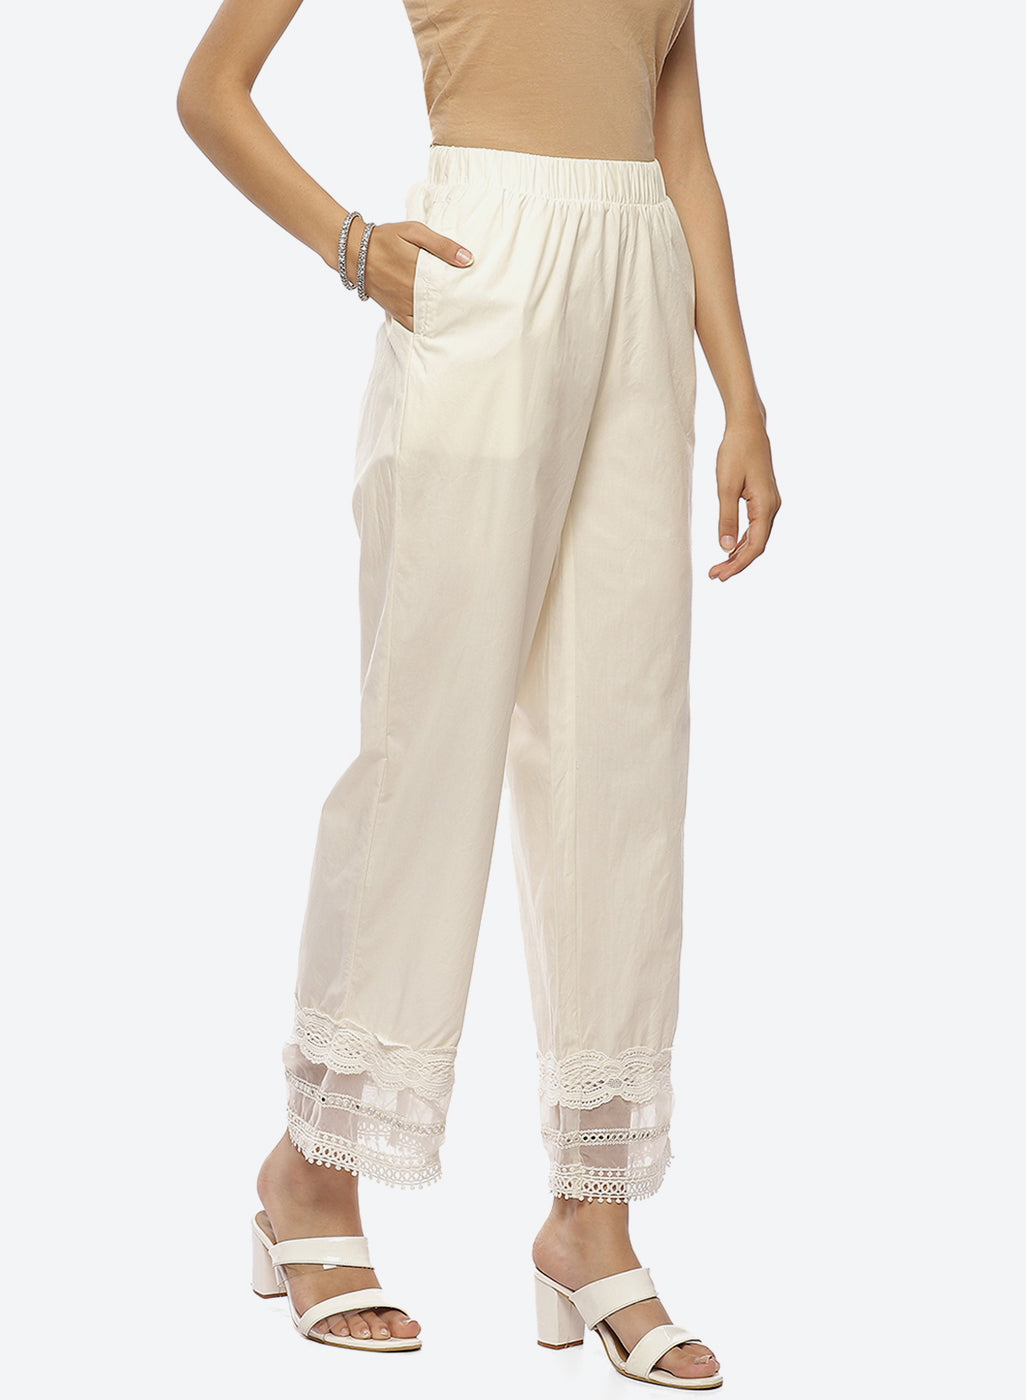 Off-White Palazzo Pants With Lace Detail